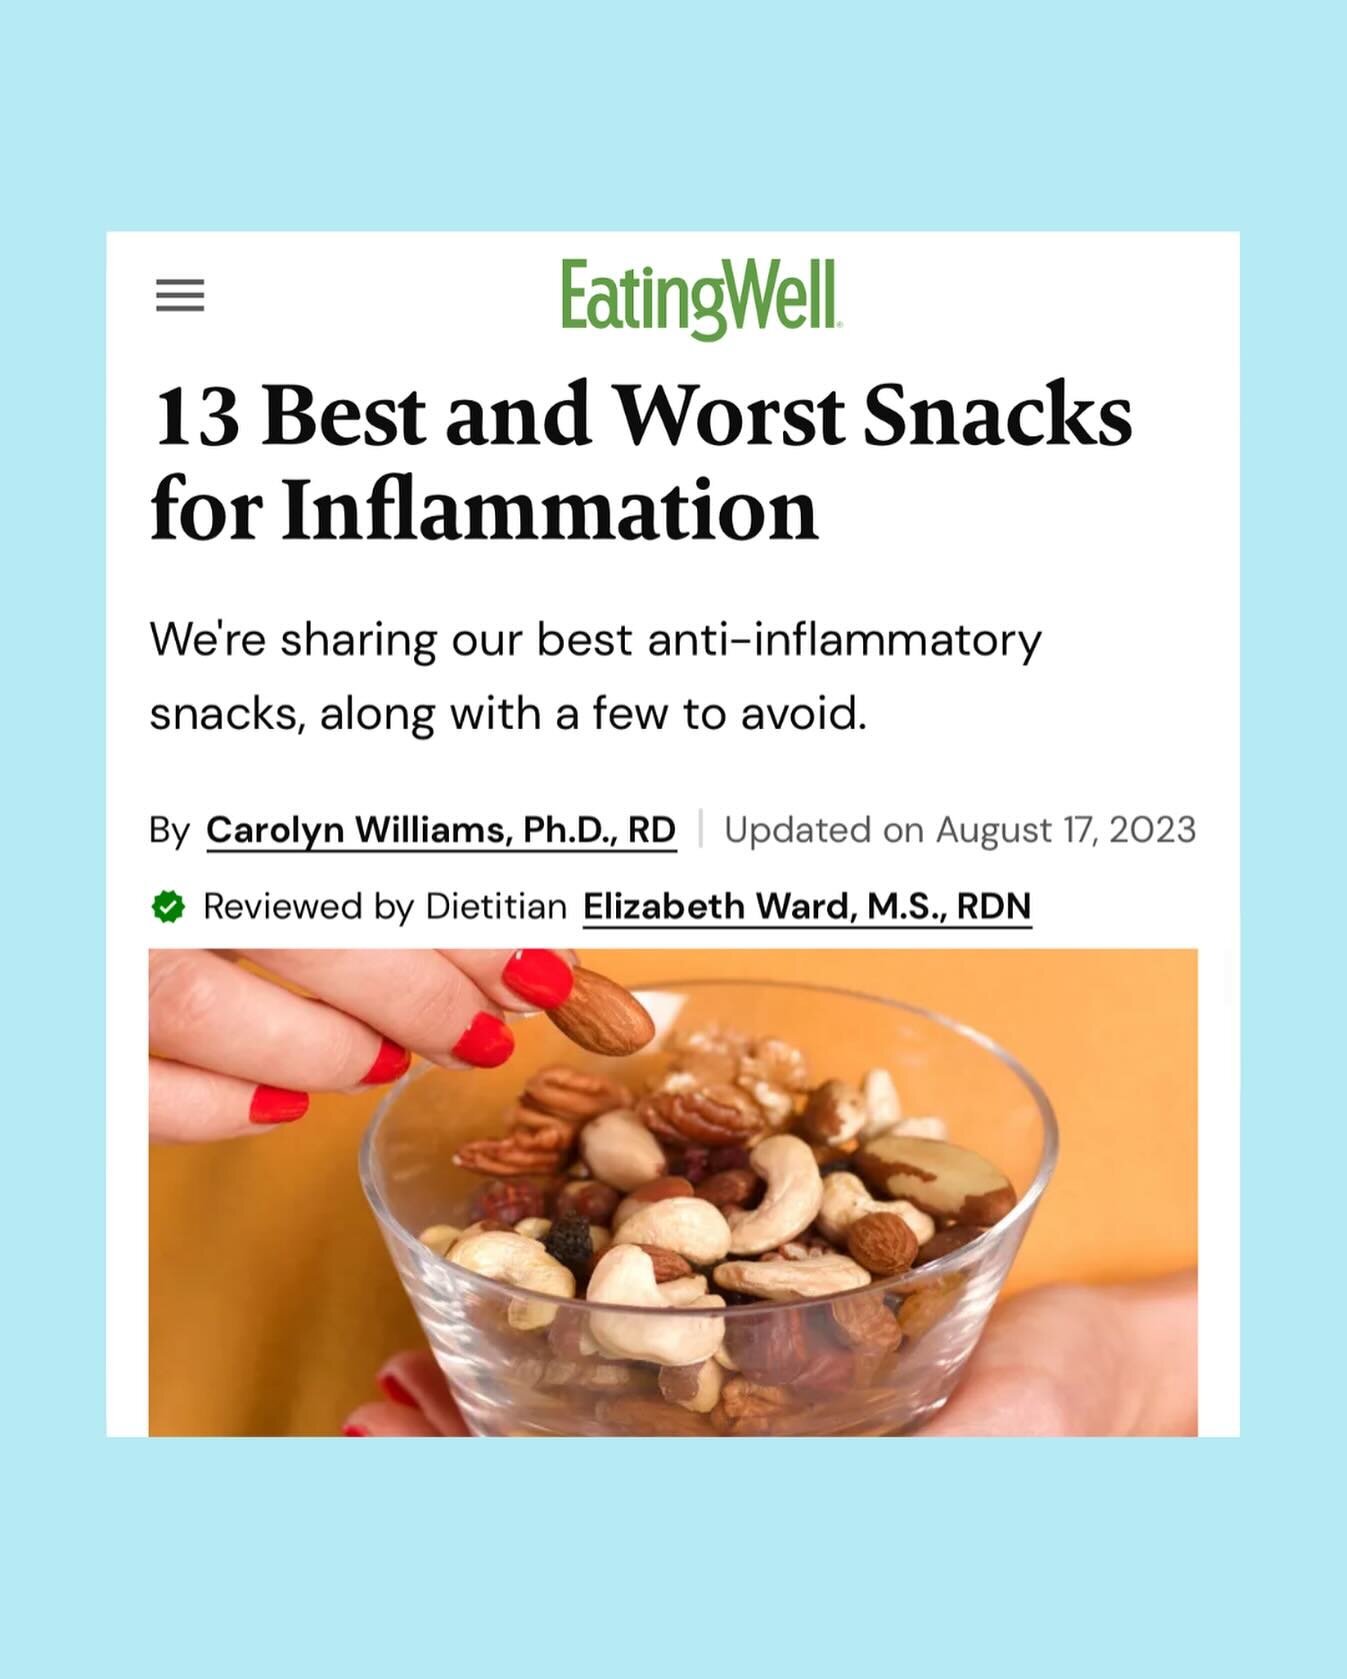 Stocking up on food for the week? Check out these top snacks before you head to the grocery. 

Comment SNACKS below for the article. 

#antiinflammatorydiet #mealsthatheal #inflammation #eatingwell #snacktime #healthysnackideas #healyourbody #chronic